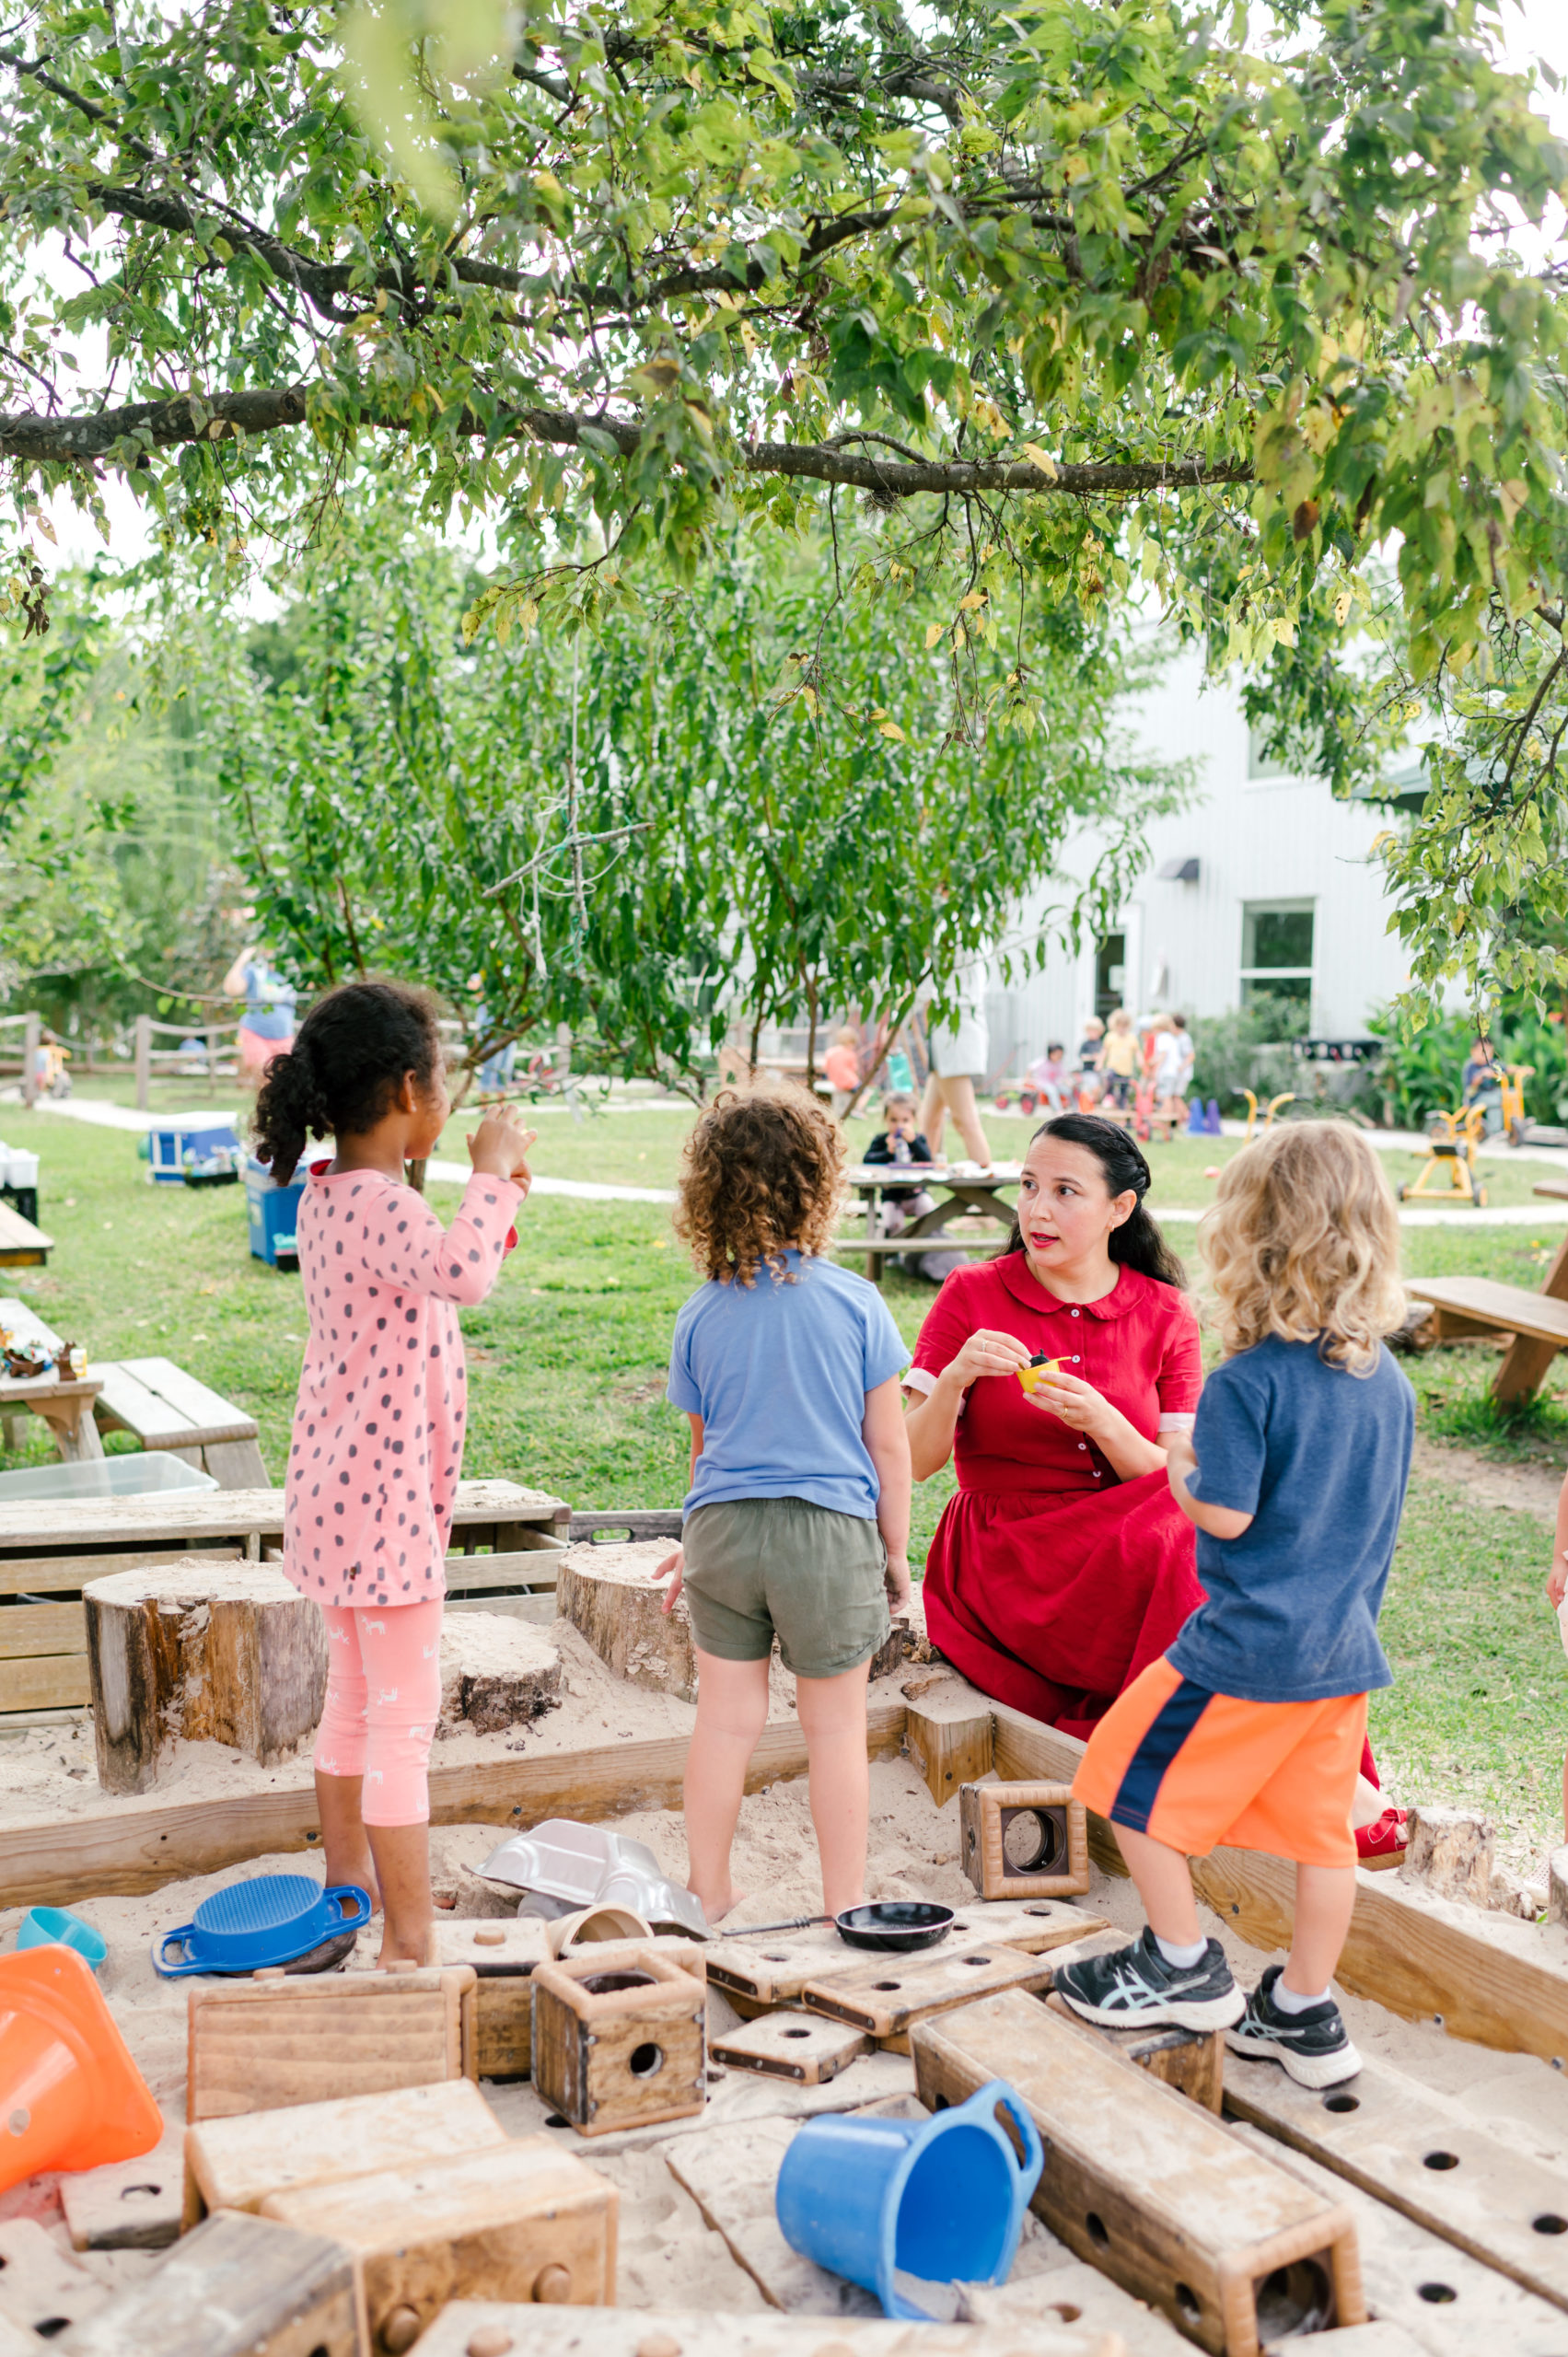 Photo of woman child development coach in a beautiful red dress interacting with kids on a playground outside in a sandbox during her branding photography session